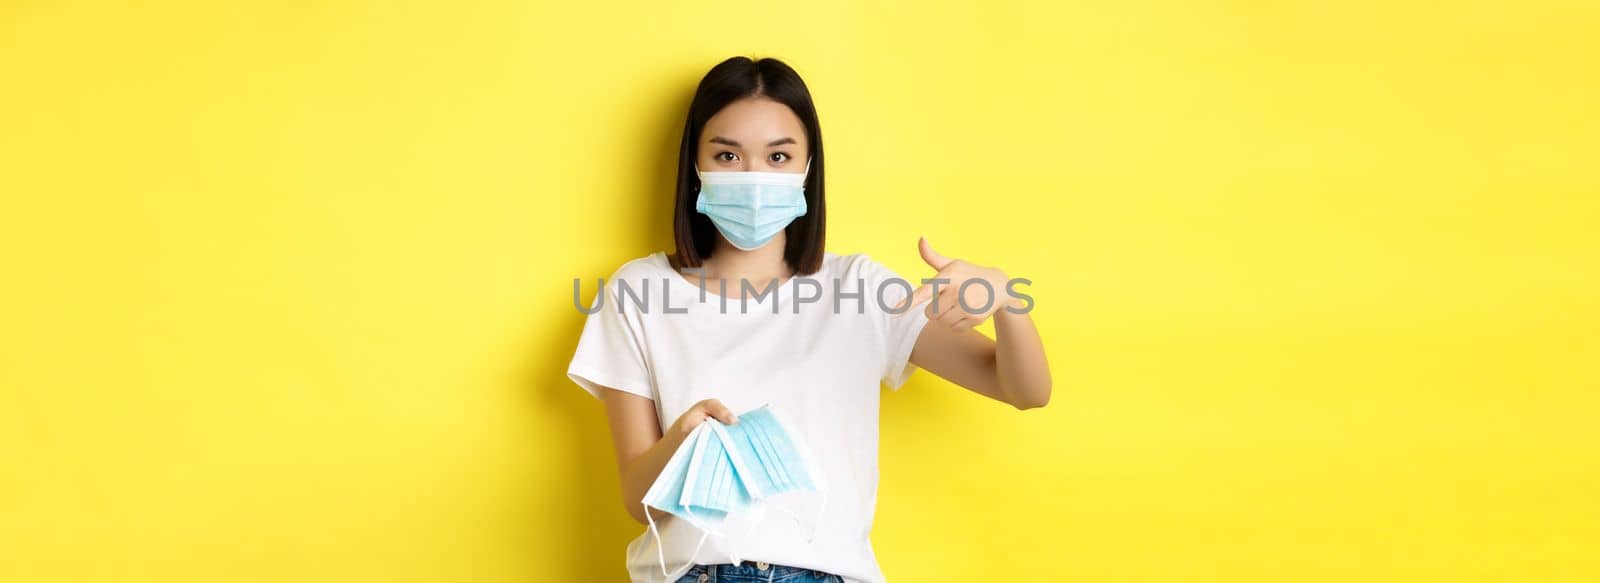 Coronavirus, quarantine and medicine concept. Young asian woman pointing finger at medical masks for going outdoors, standing over yellow background.